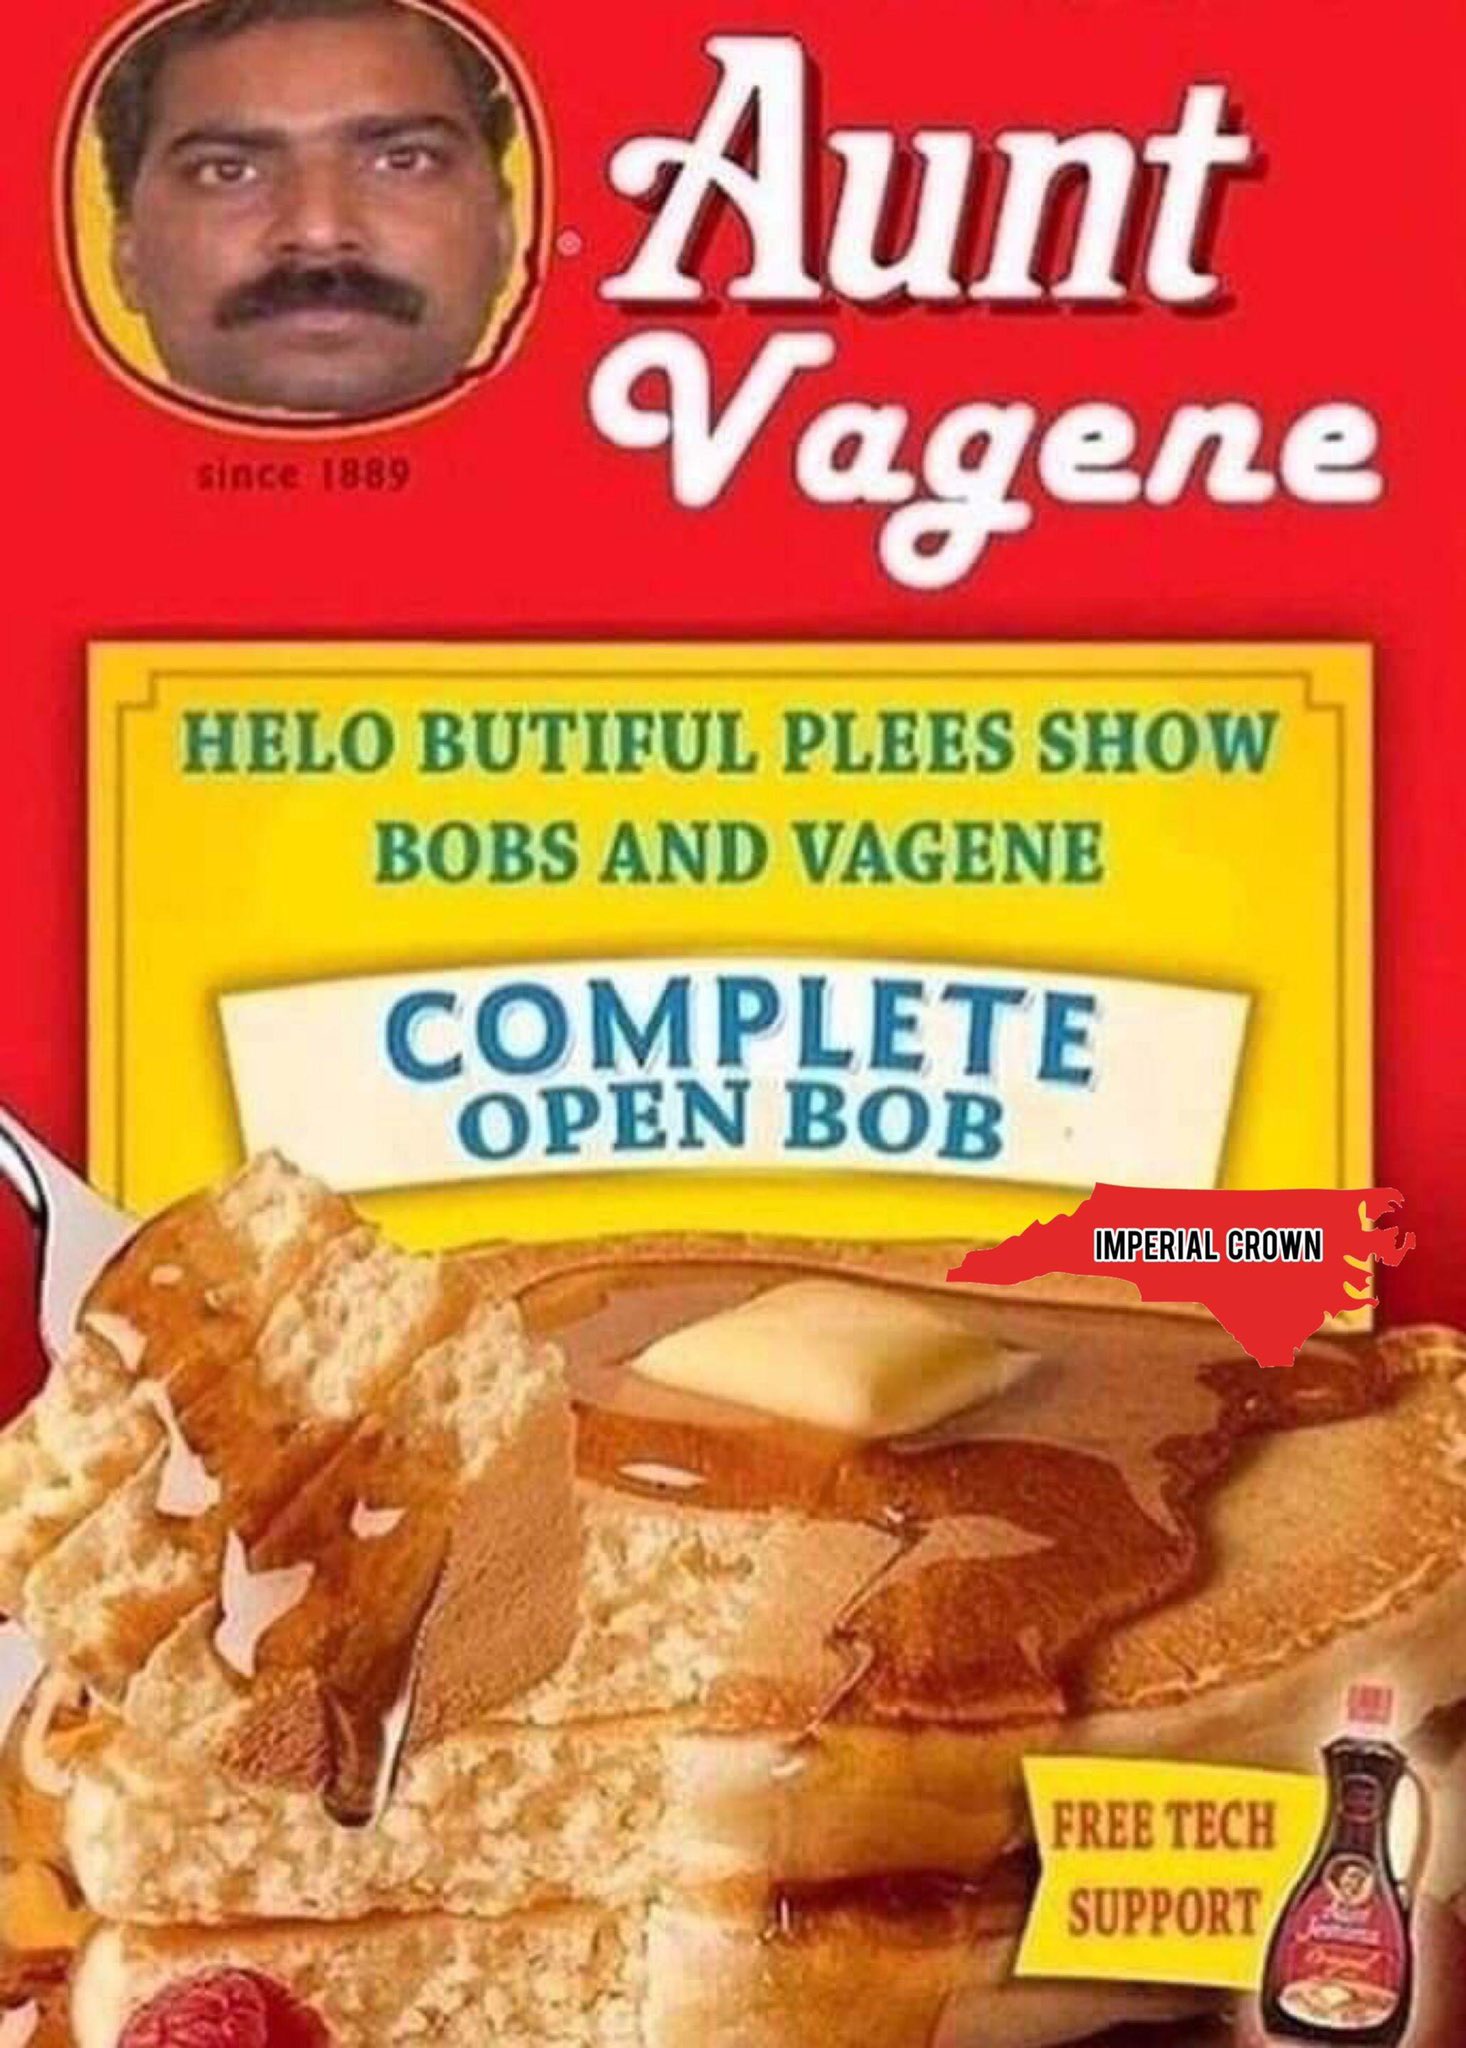 Aunt Vagene since 1889 Helo Butiful Plees Show Bobs And Vagene Complete Open Bob Imperial Crown Free Tech Support